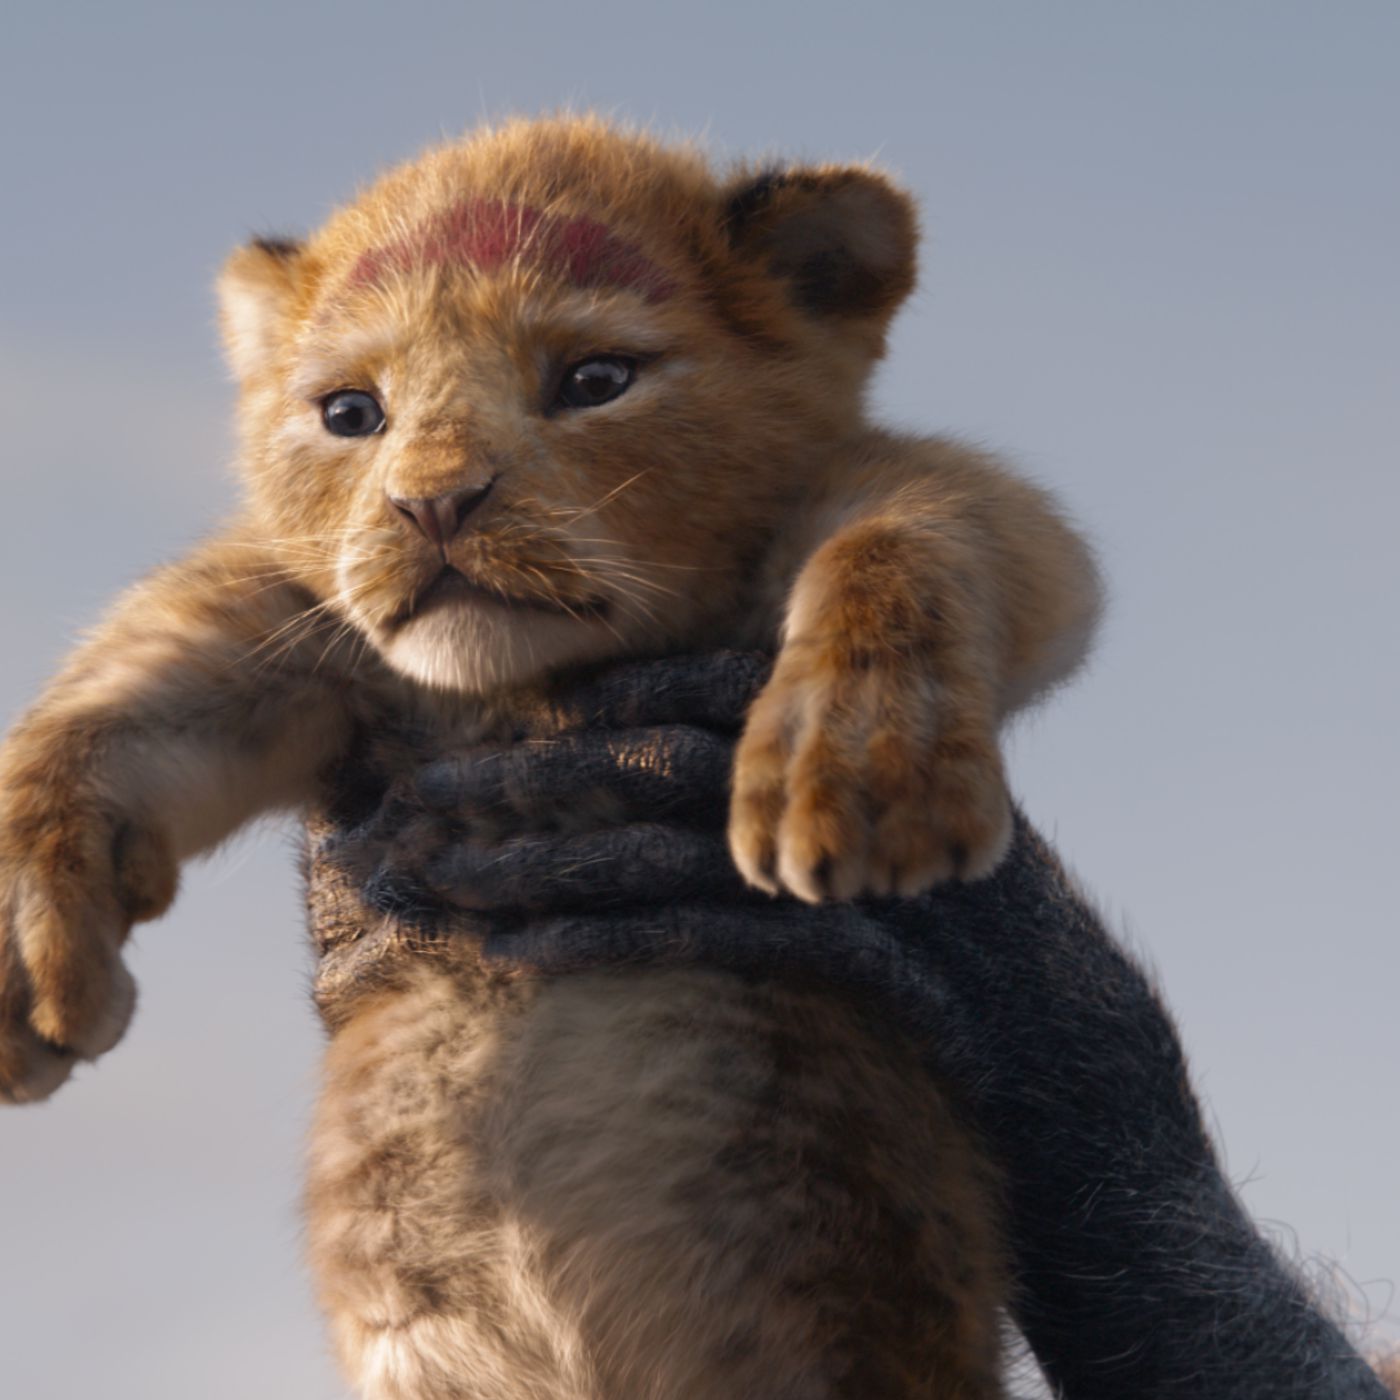 Lion King 2019: what's better and worse about the Disney remake